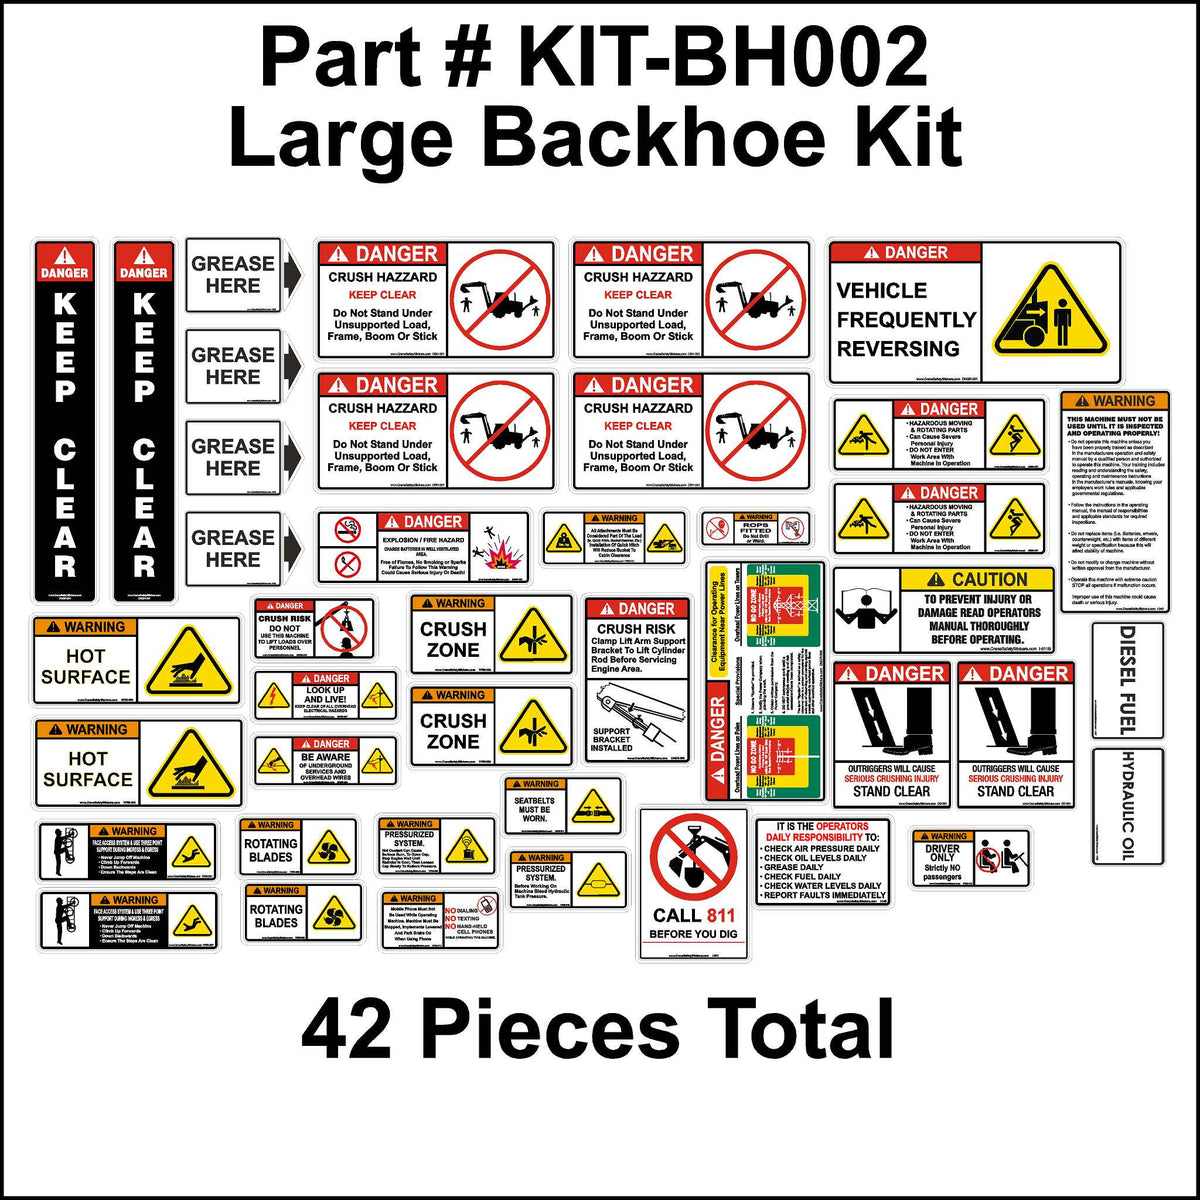 Backhoe Stickers, Backhoe Safety Stickers Kit. 42 Stickers for a Backhoe to Replace the Old Safety Warning Stickers.